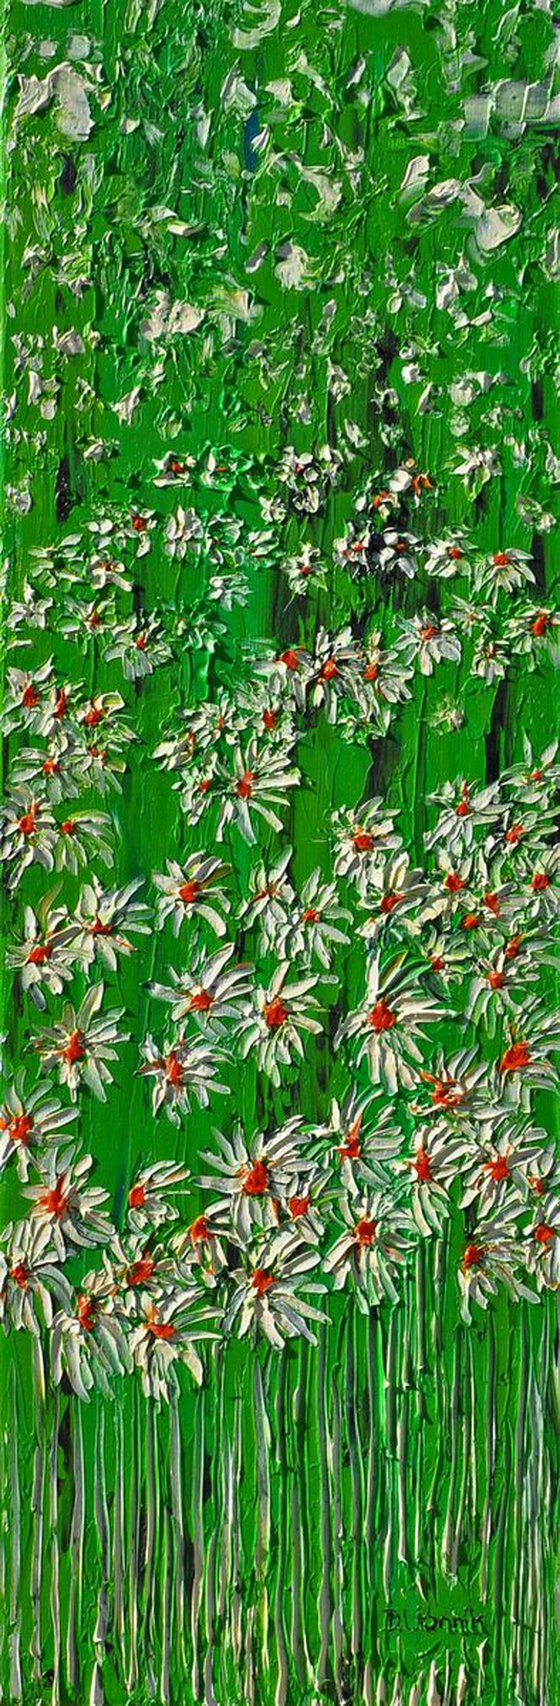 Daisies In The Grass 1